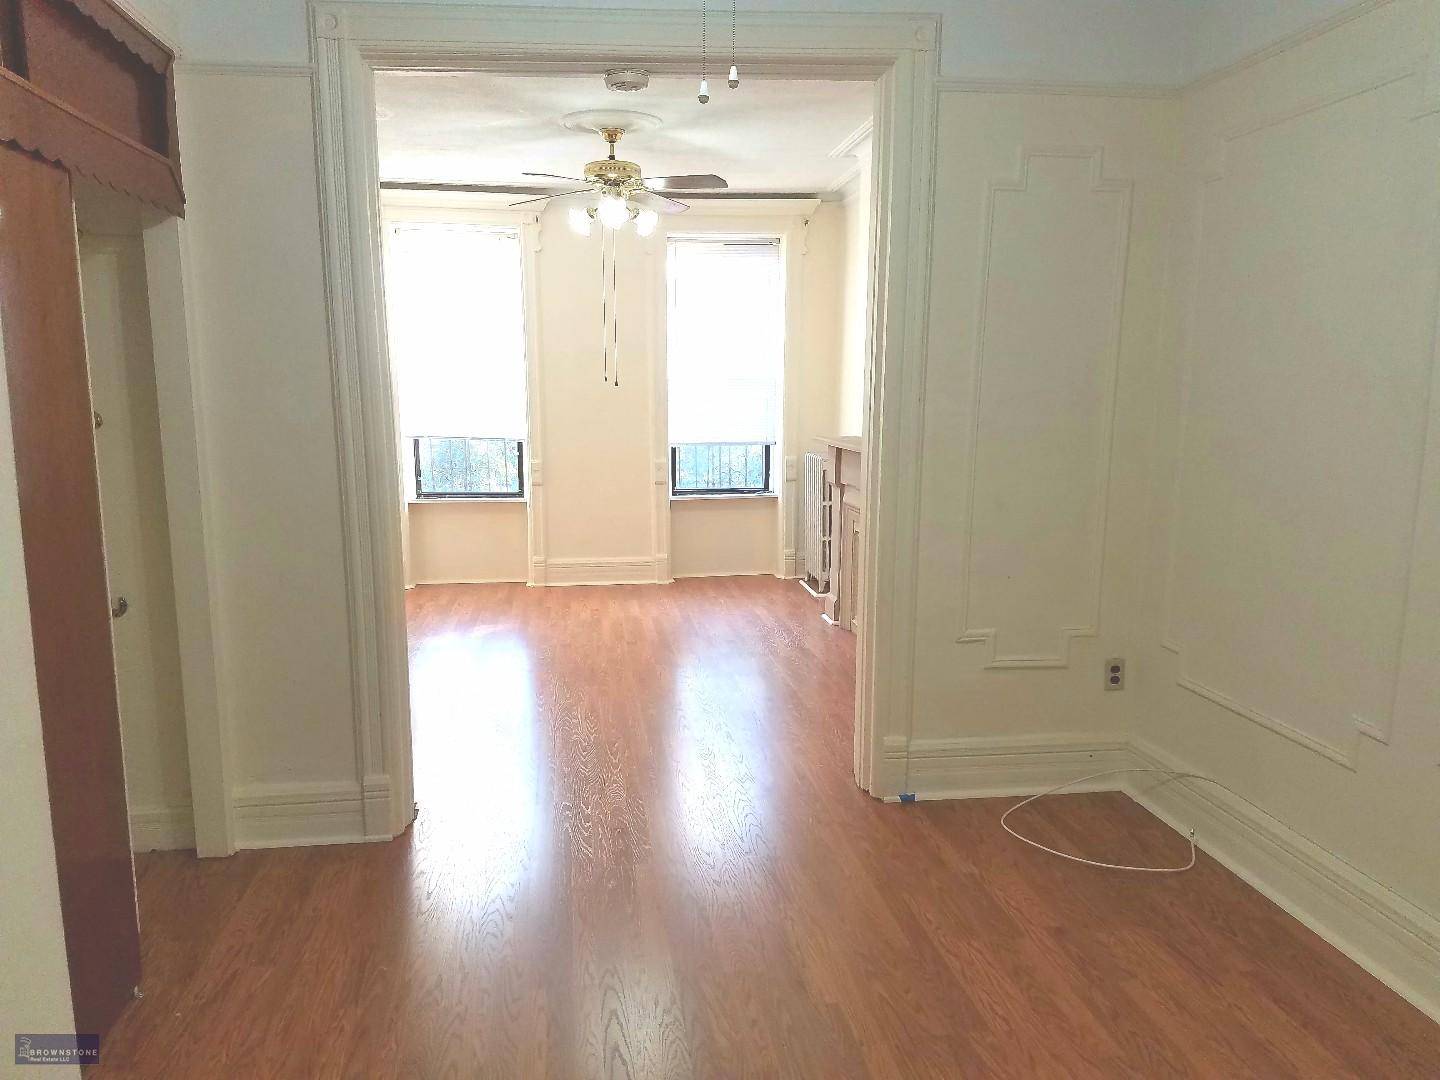 NO FEE ! Sunny and spacious one bedroom plus den plus office apartment on great block located in the Center Slope Gowanus border.